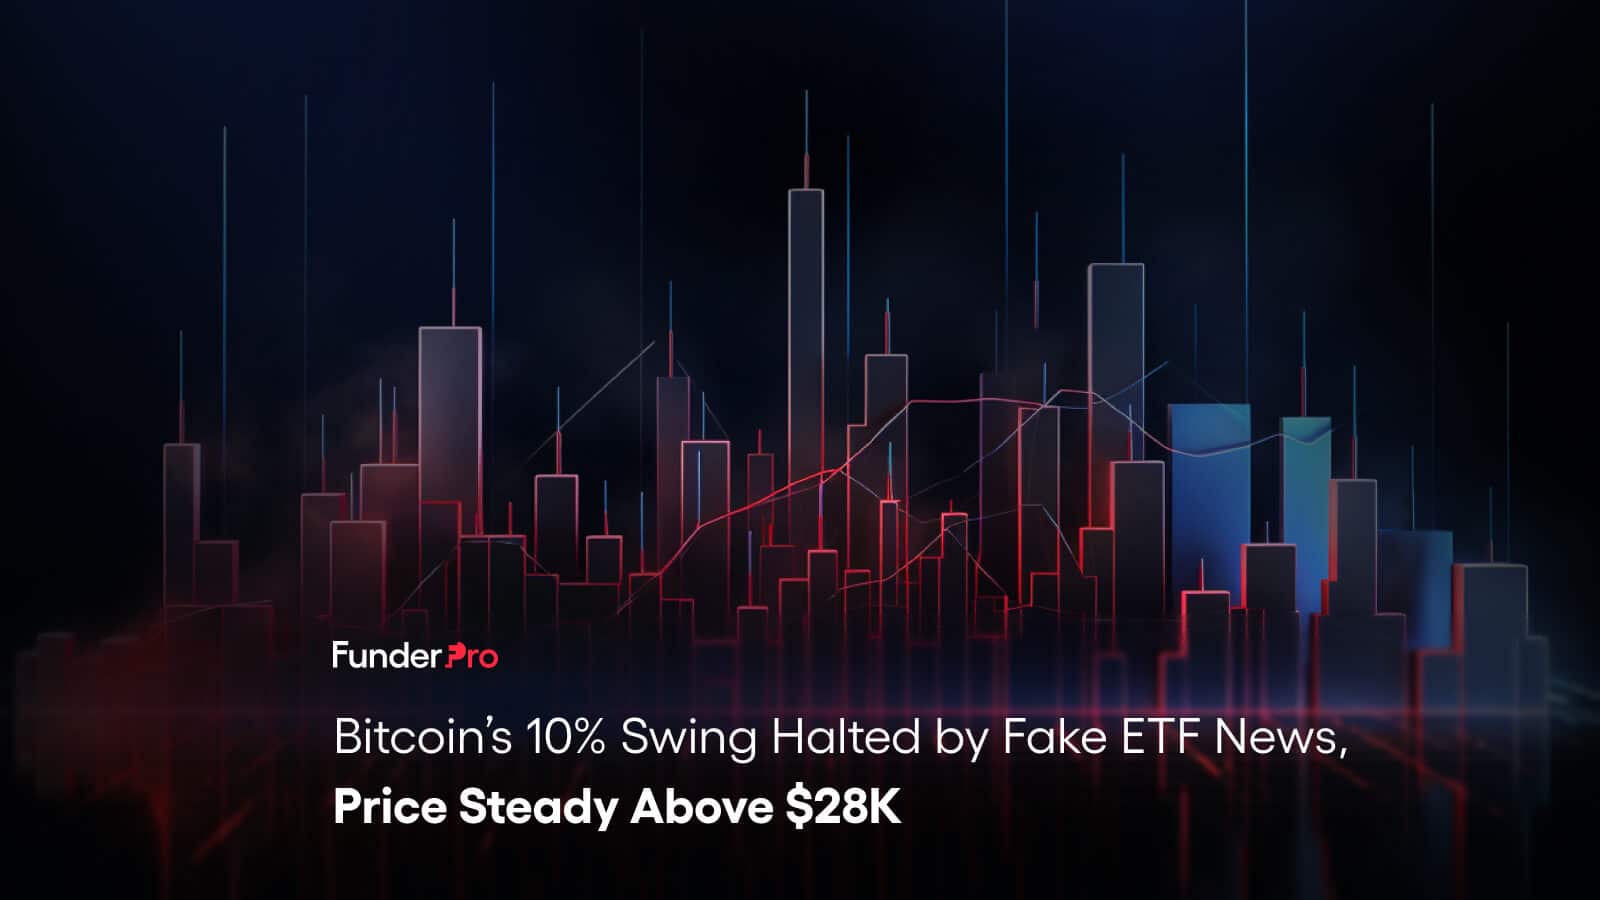 Bitcoin’s 10% Swing Halted by Fake ETF News, Price Steady Above $28K